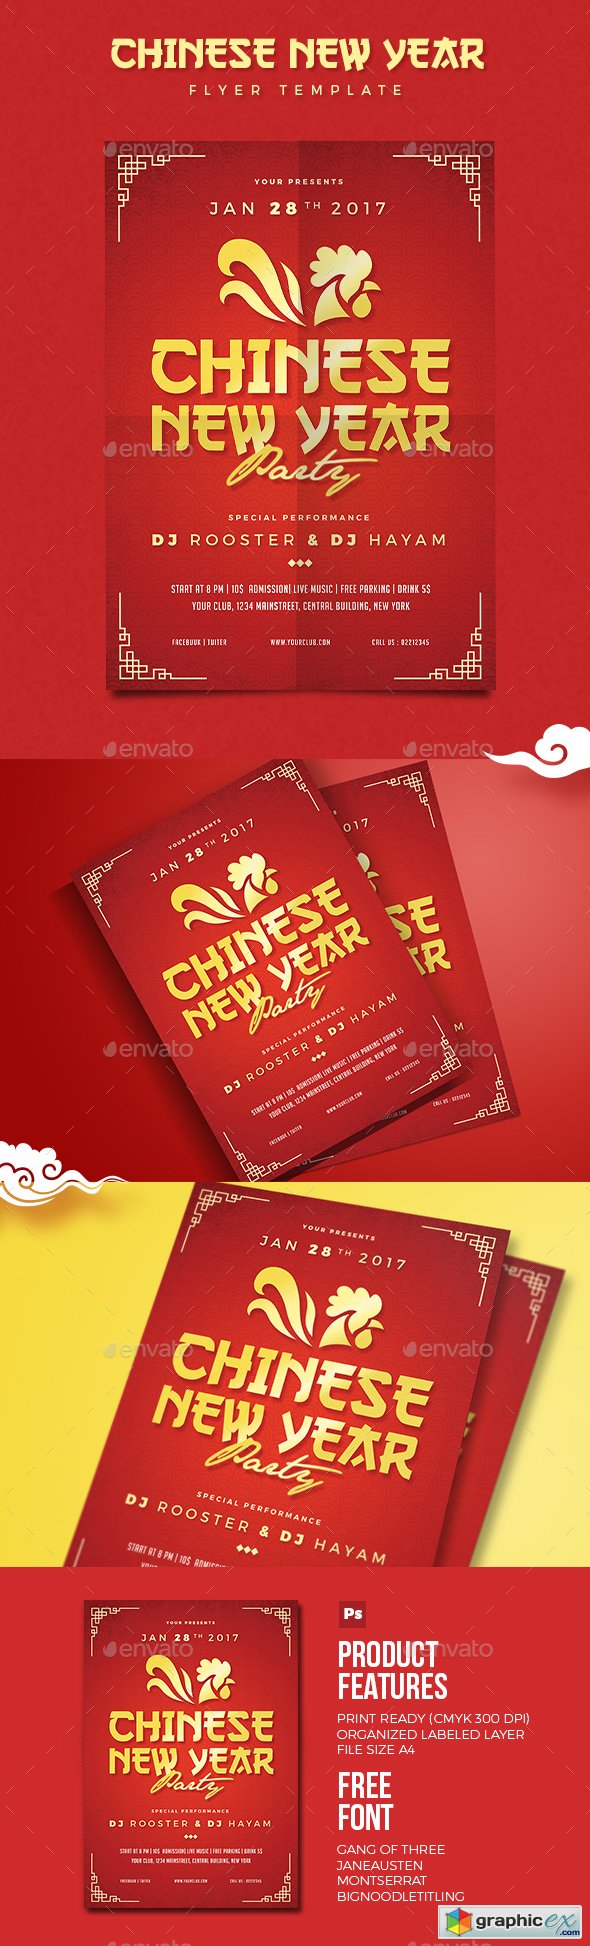 Chinese New Year Flyer 19253975